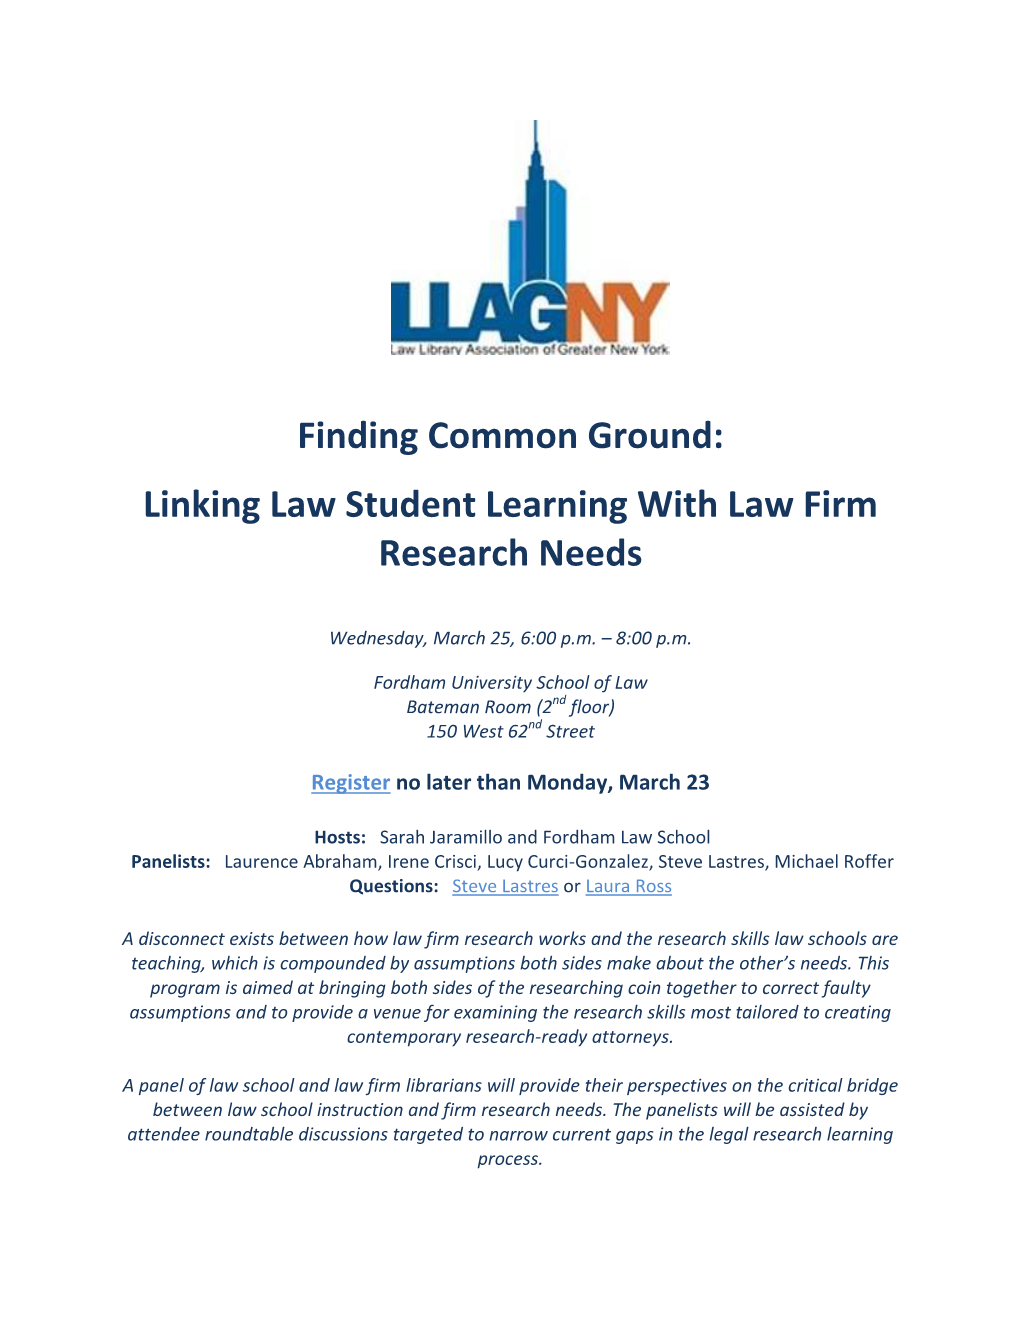 Finding Common Ground: Linking Law Student Learning with Law Firm Research Needs